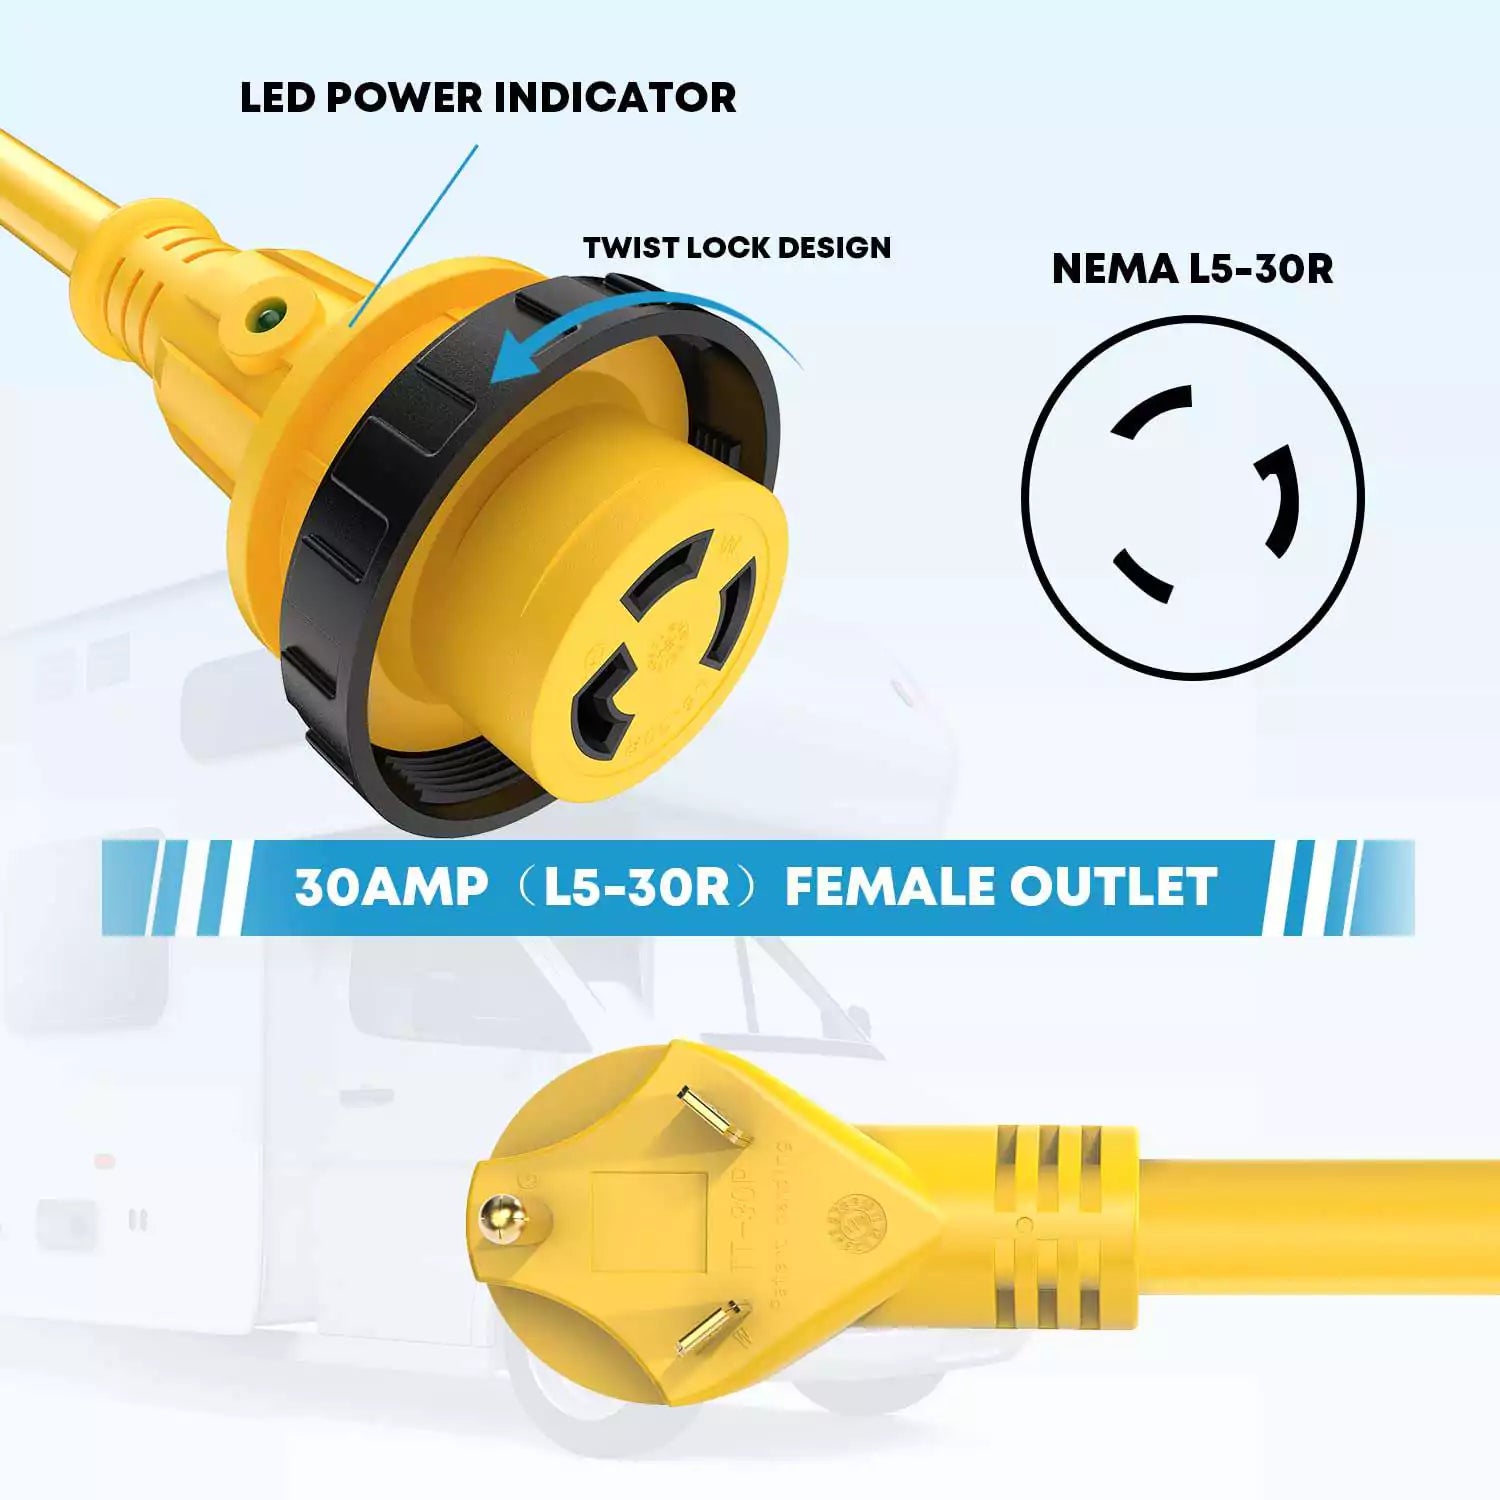 30 amp female outlet RV cord